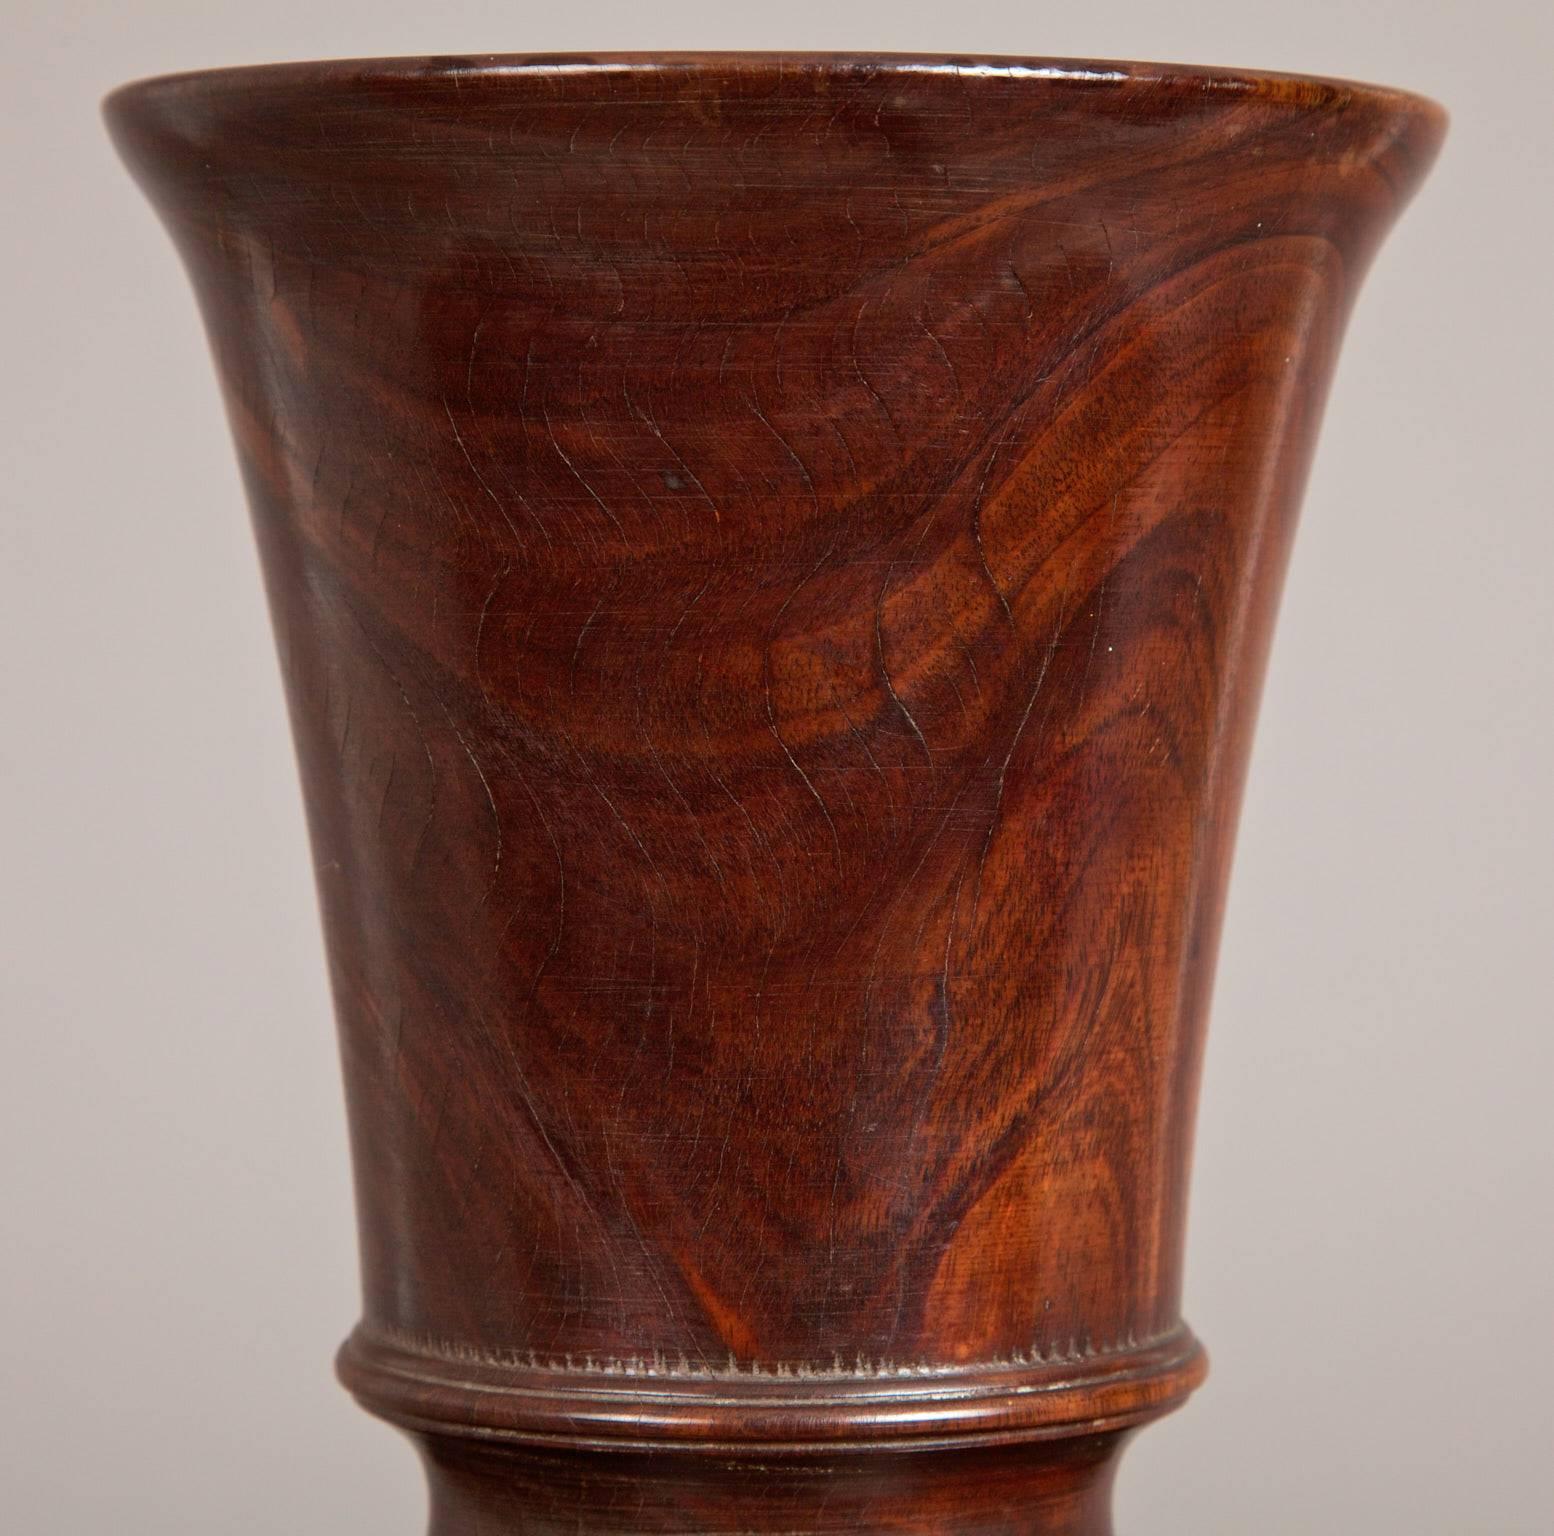 Late 19th century lignum vitae urn, English, circa 1860-1880.

The vase shaped vase or urn with high quality turning from solid Lignum Vitae with a tapering body and bulbous foot.
   